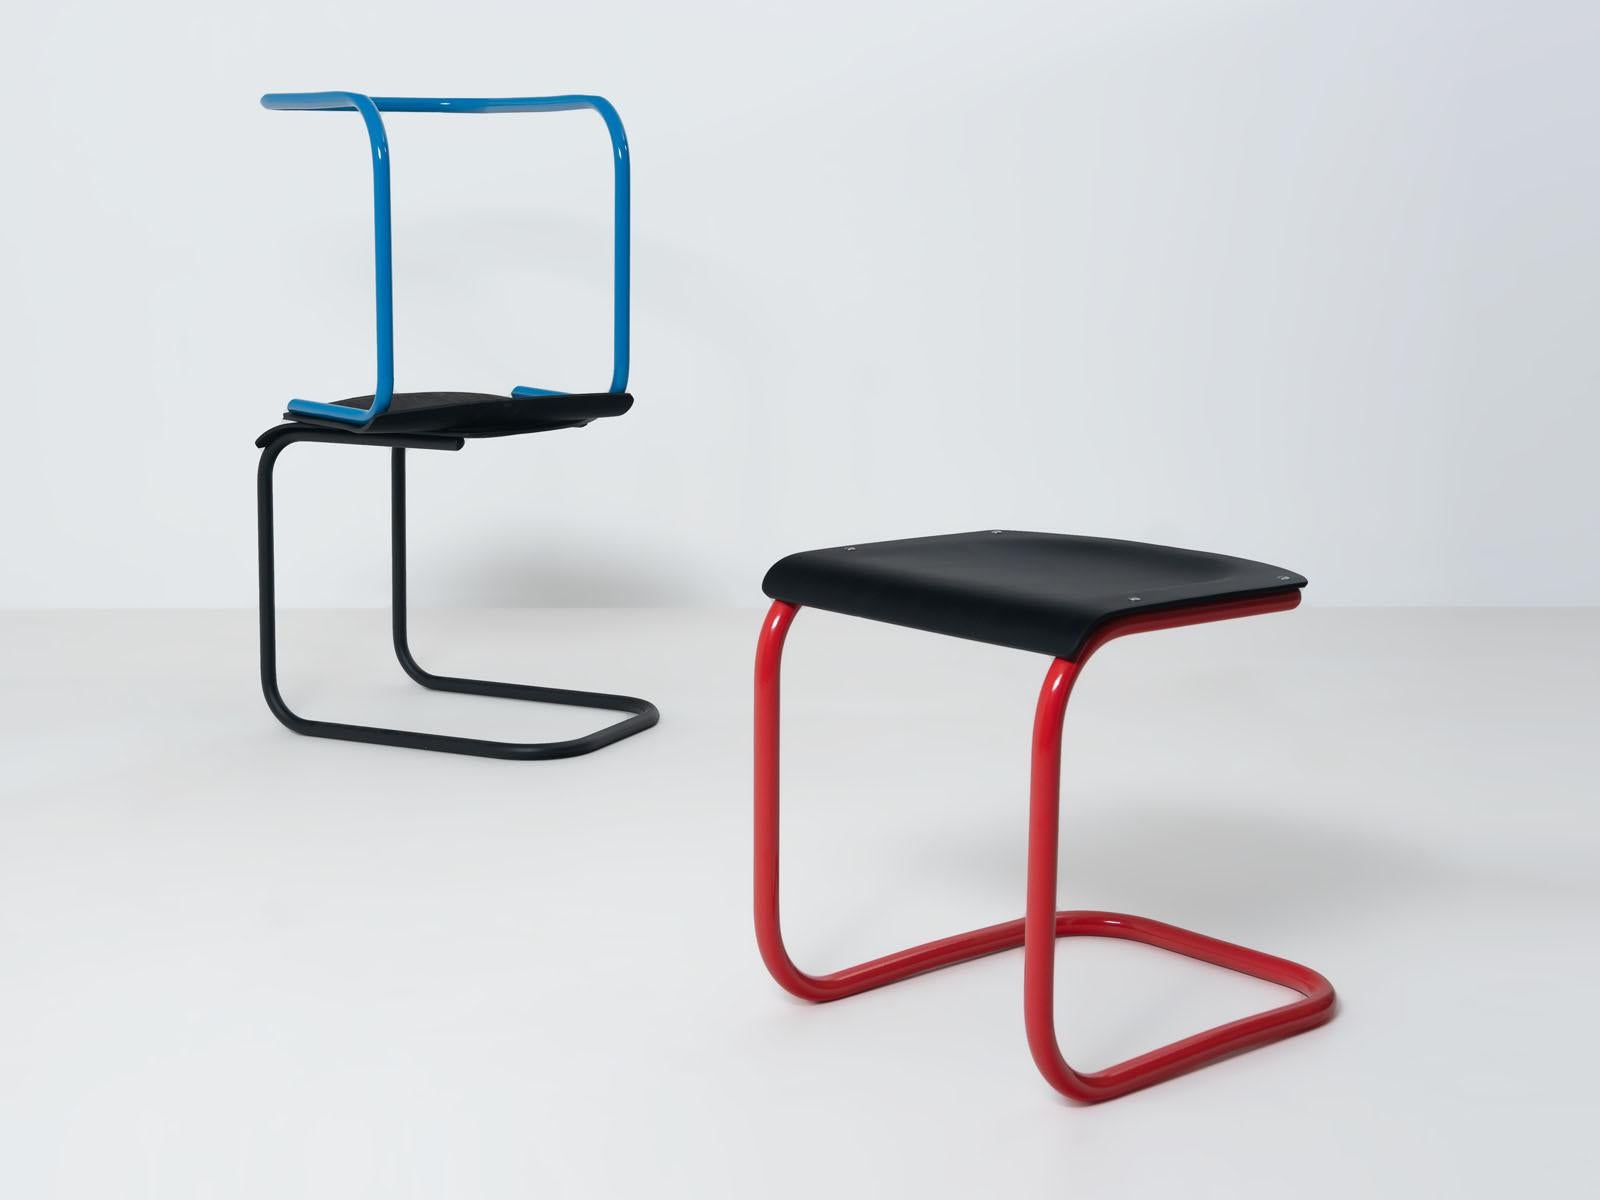 Powder-Coated Mart Stam Bauhaus Stool in Black and Blue For Sale